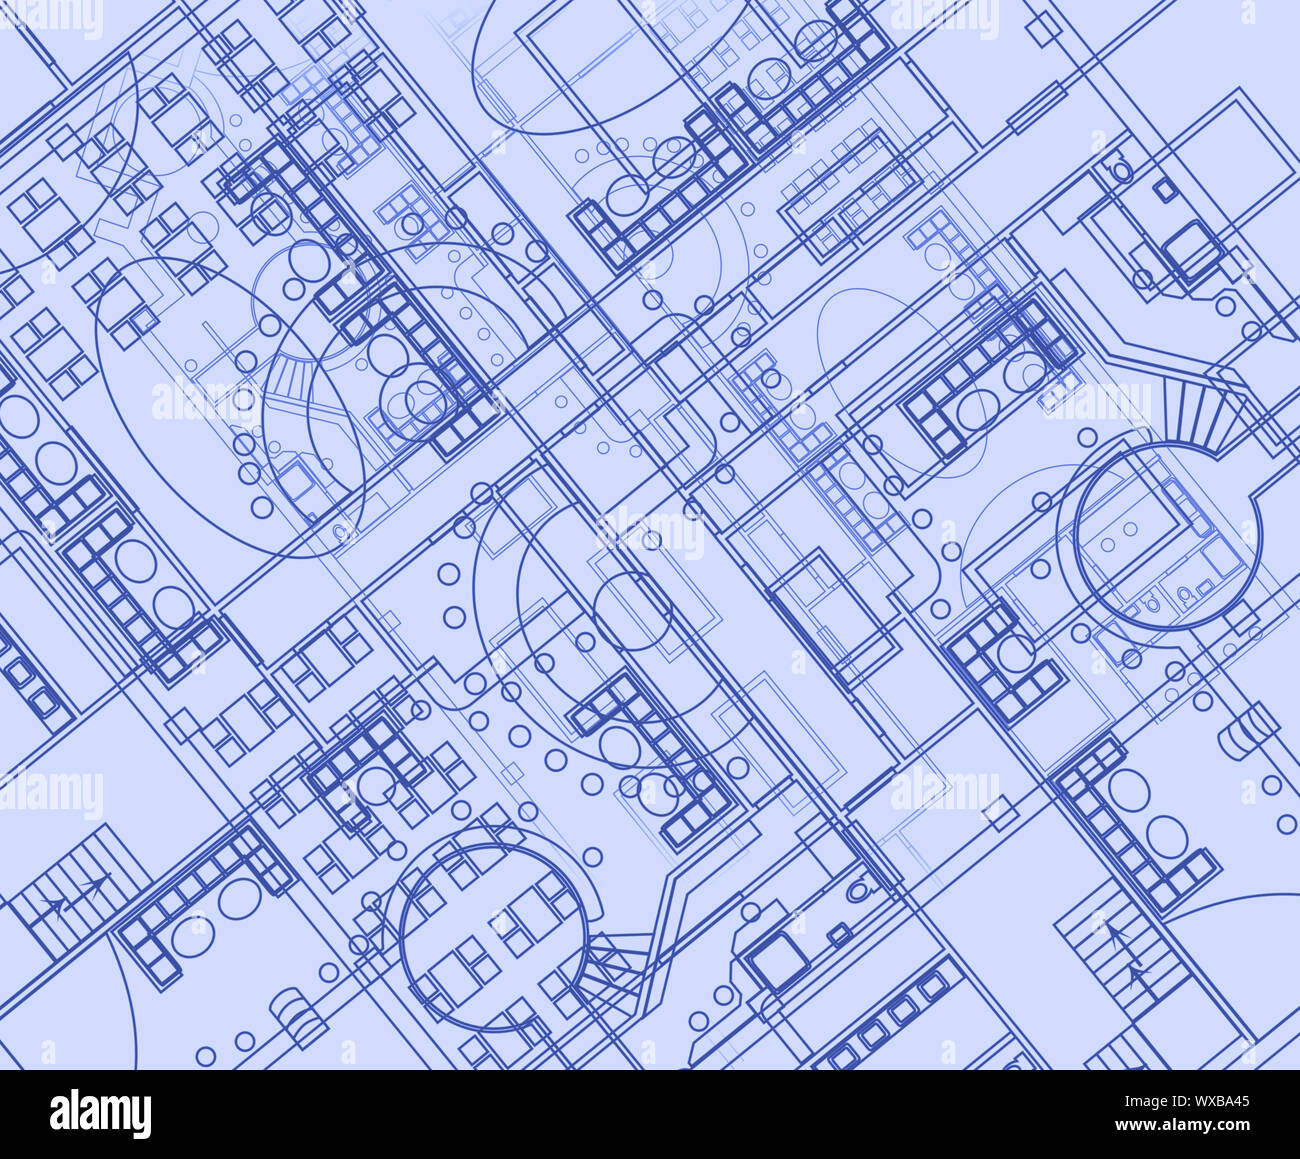 Architectural background with technical drawings. Blueprints plan texture. Drawing part of architectural project. Stock Photo